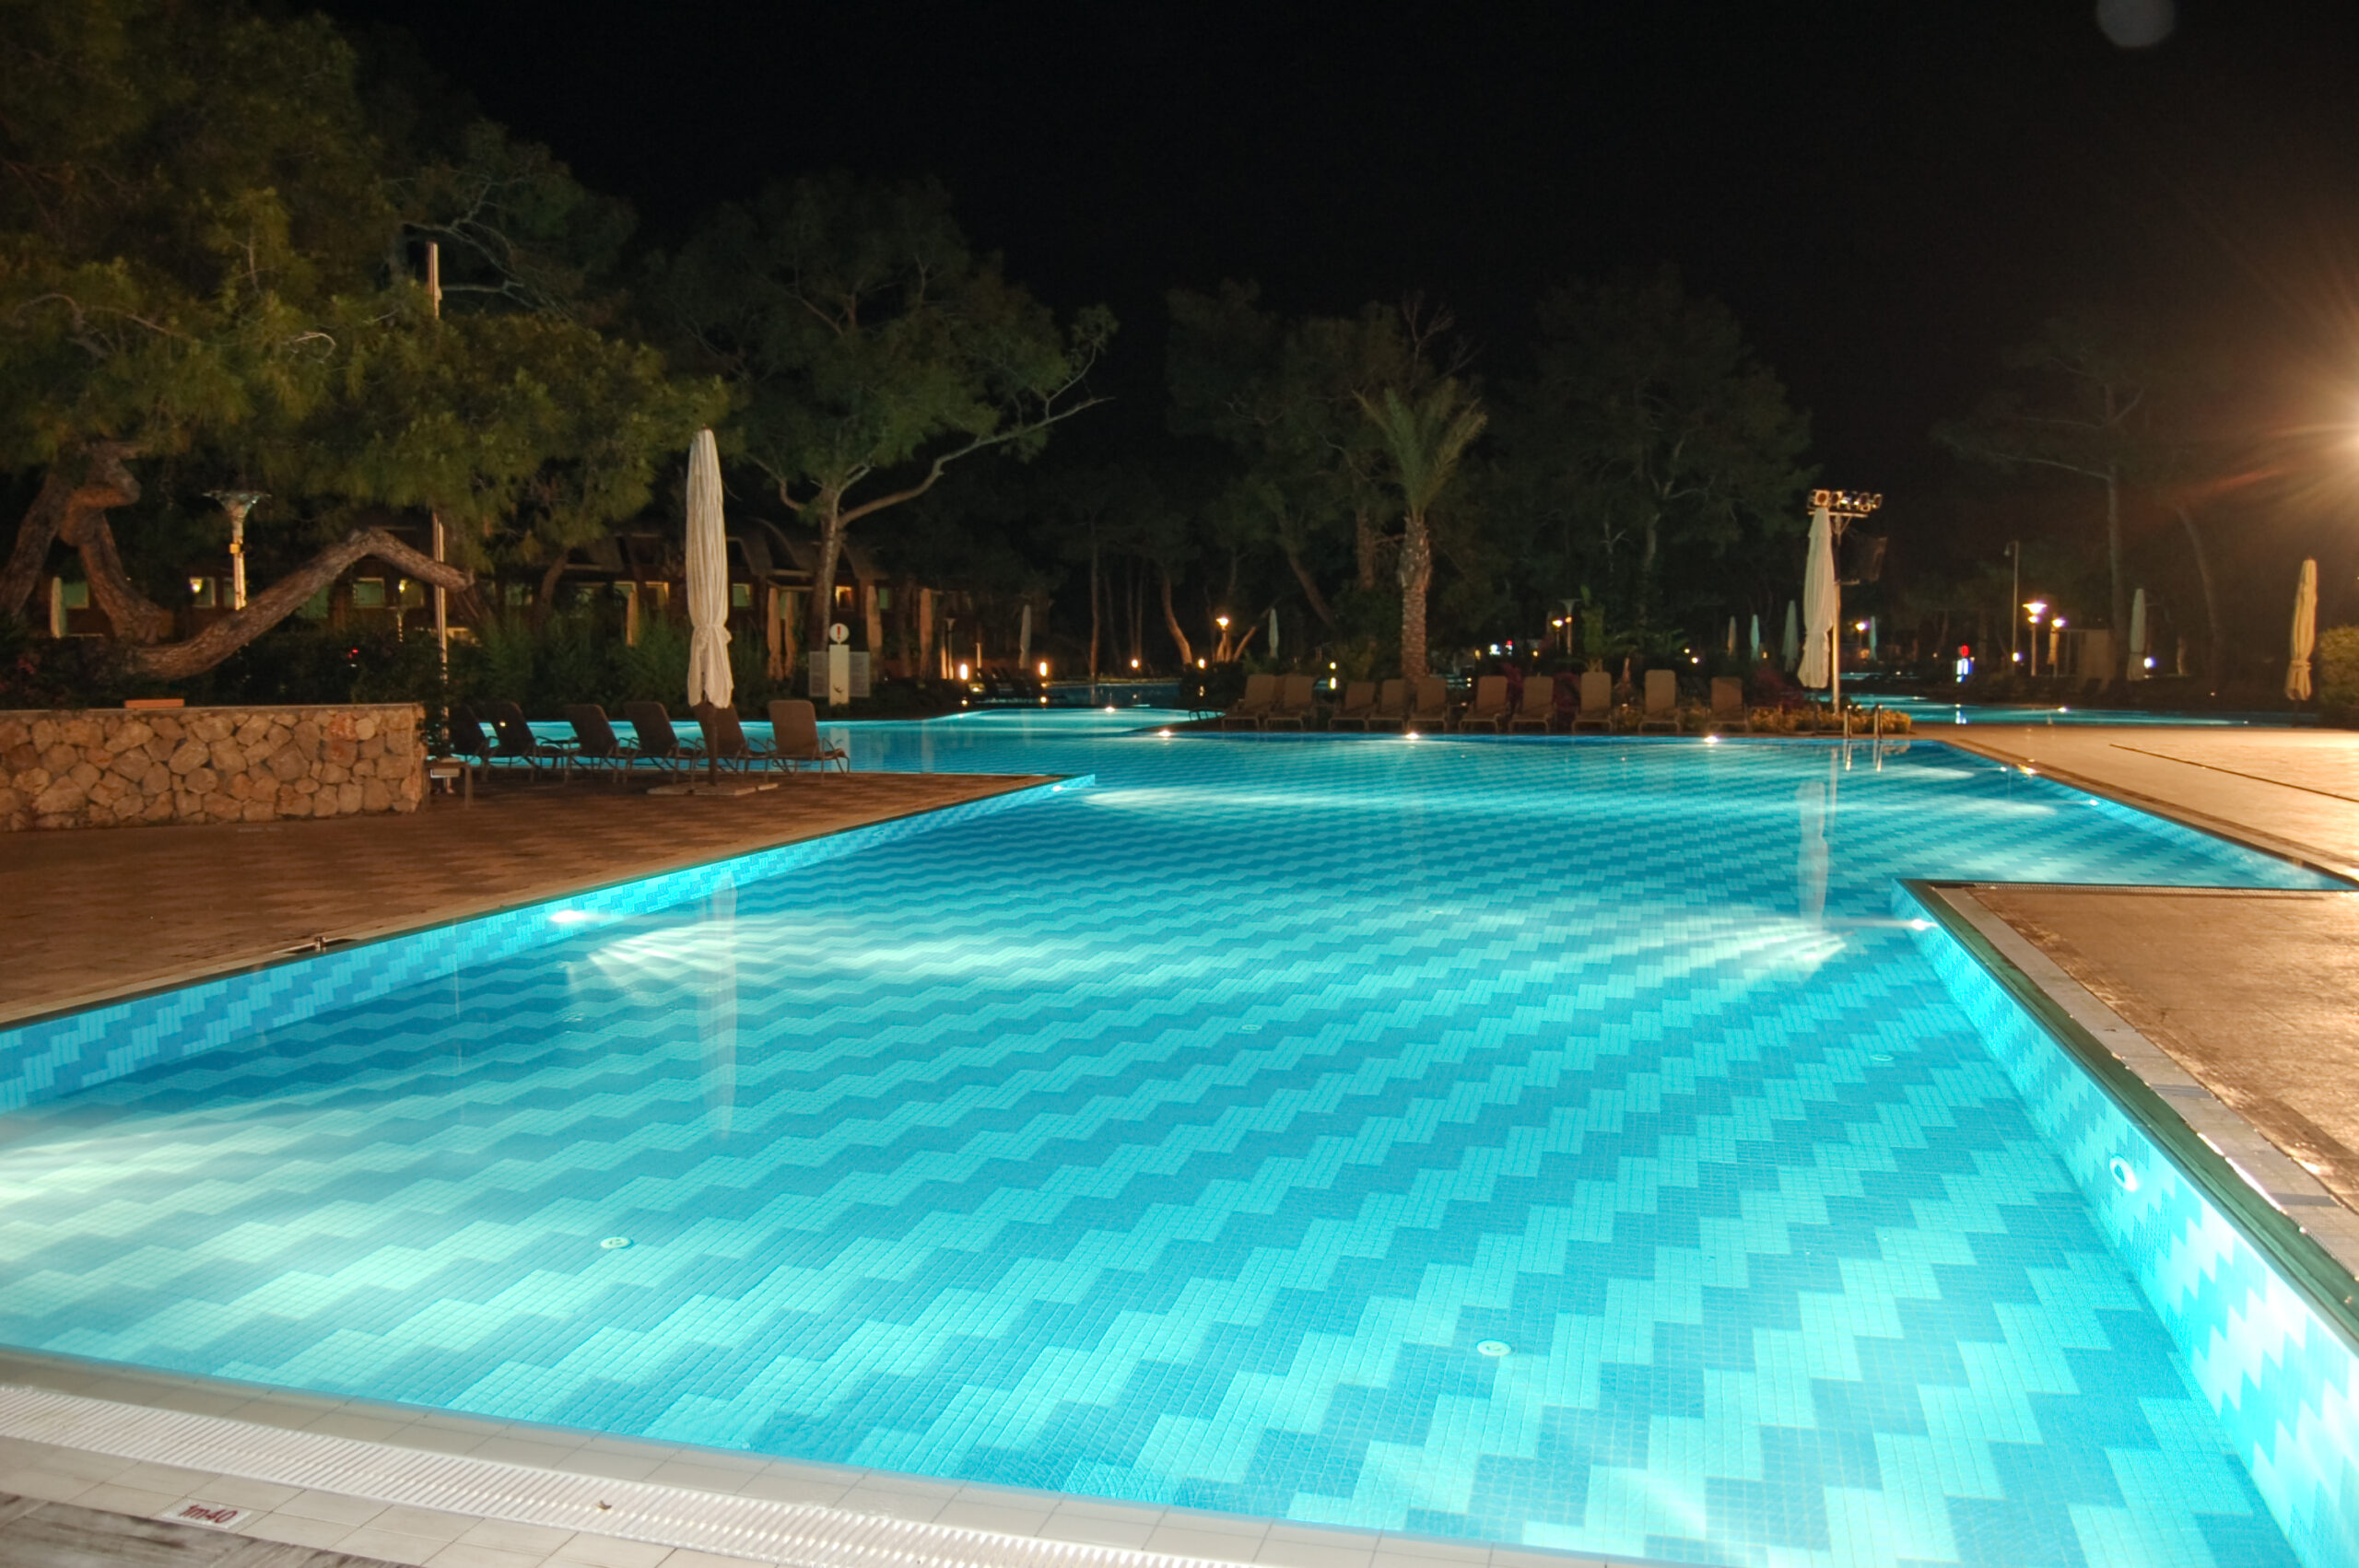 A nighttime view of a pool area surrounded by trees, with subtle lighting creating a tranquil and serene atmosphere